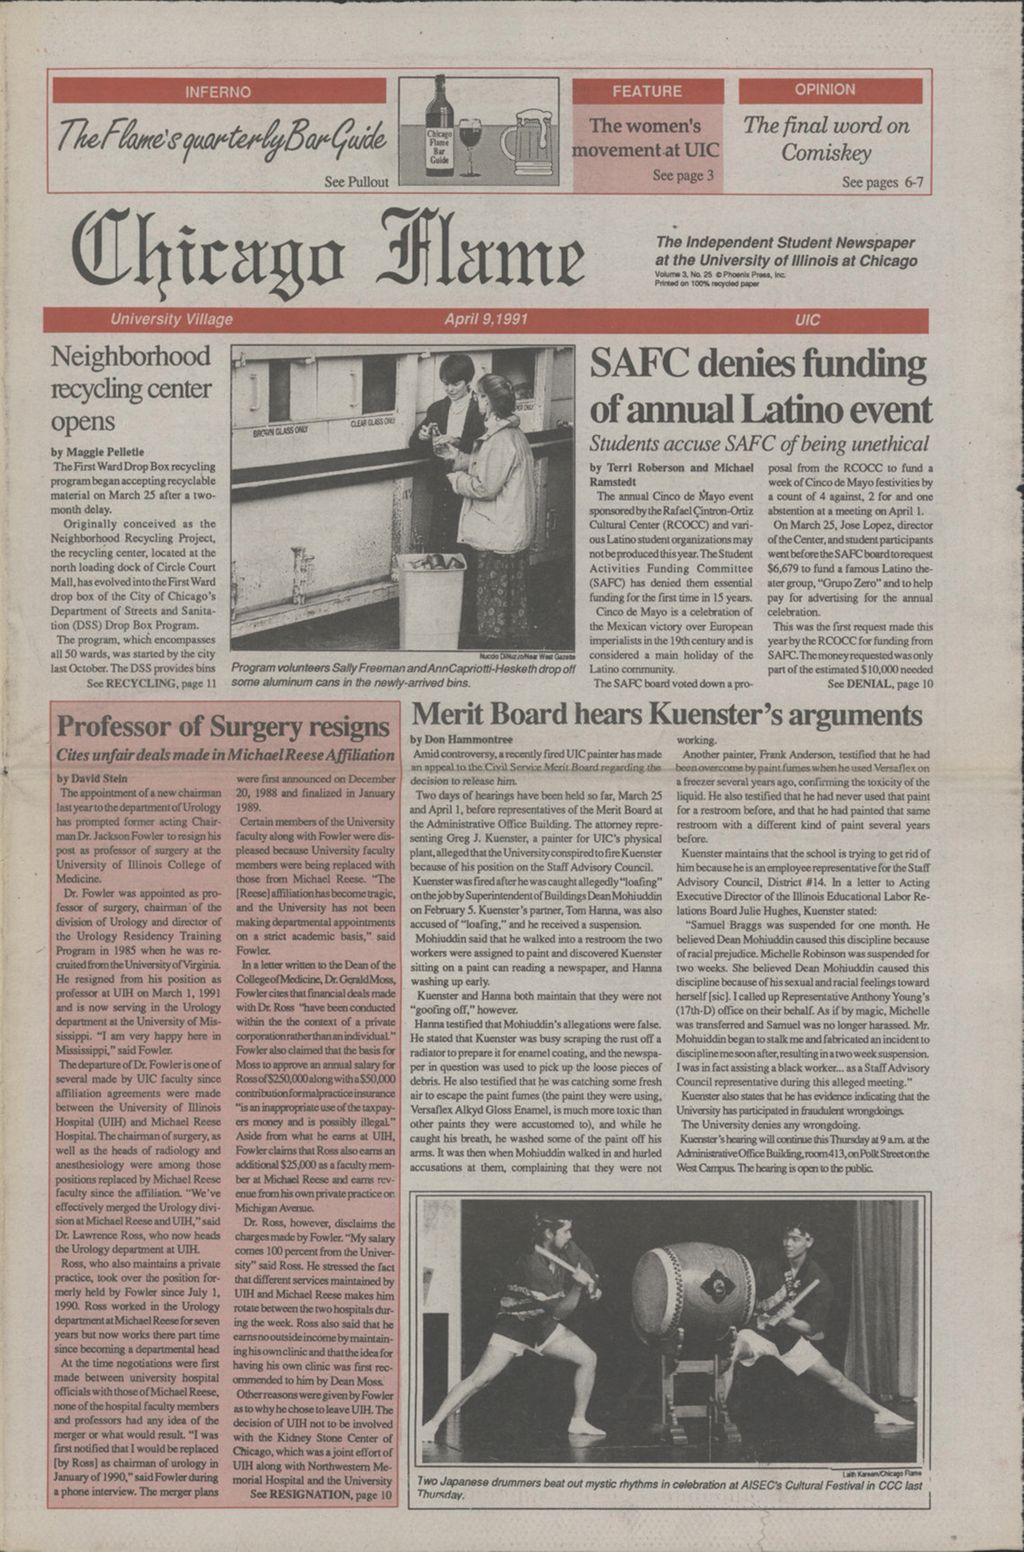 Miniature of Chicago Flame (April 9, 1991)